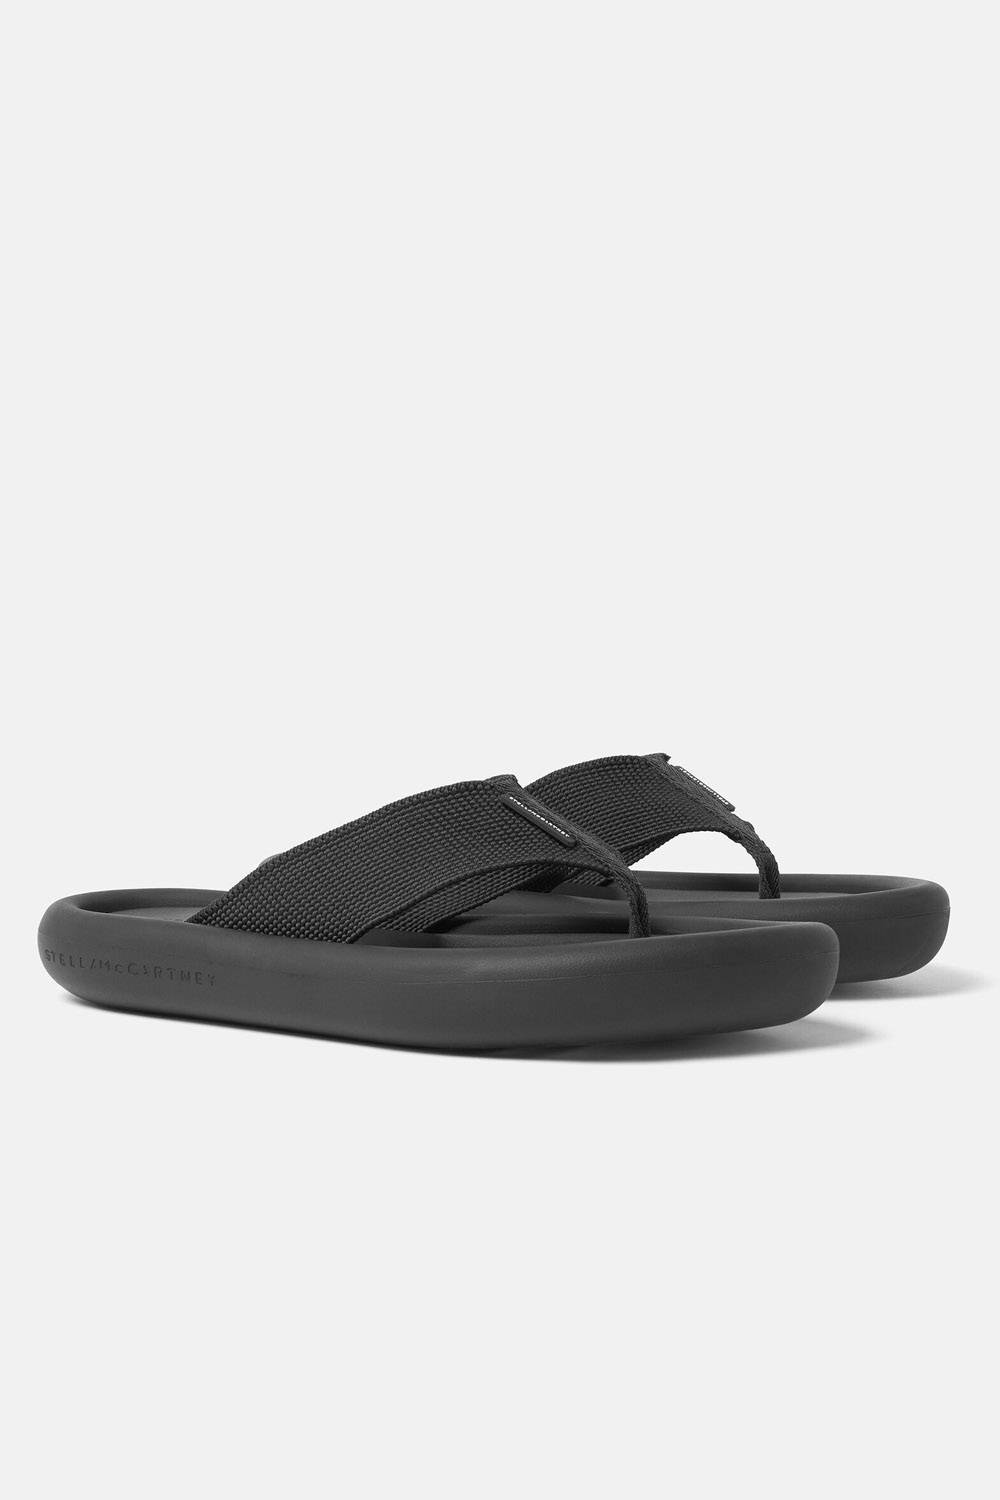 20 Best Affordable And Sustainable Flip Flops You'll Love | Panaprium